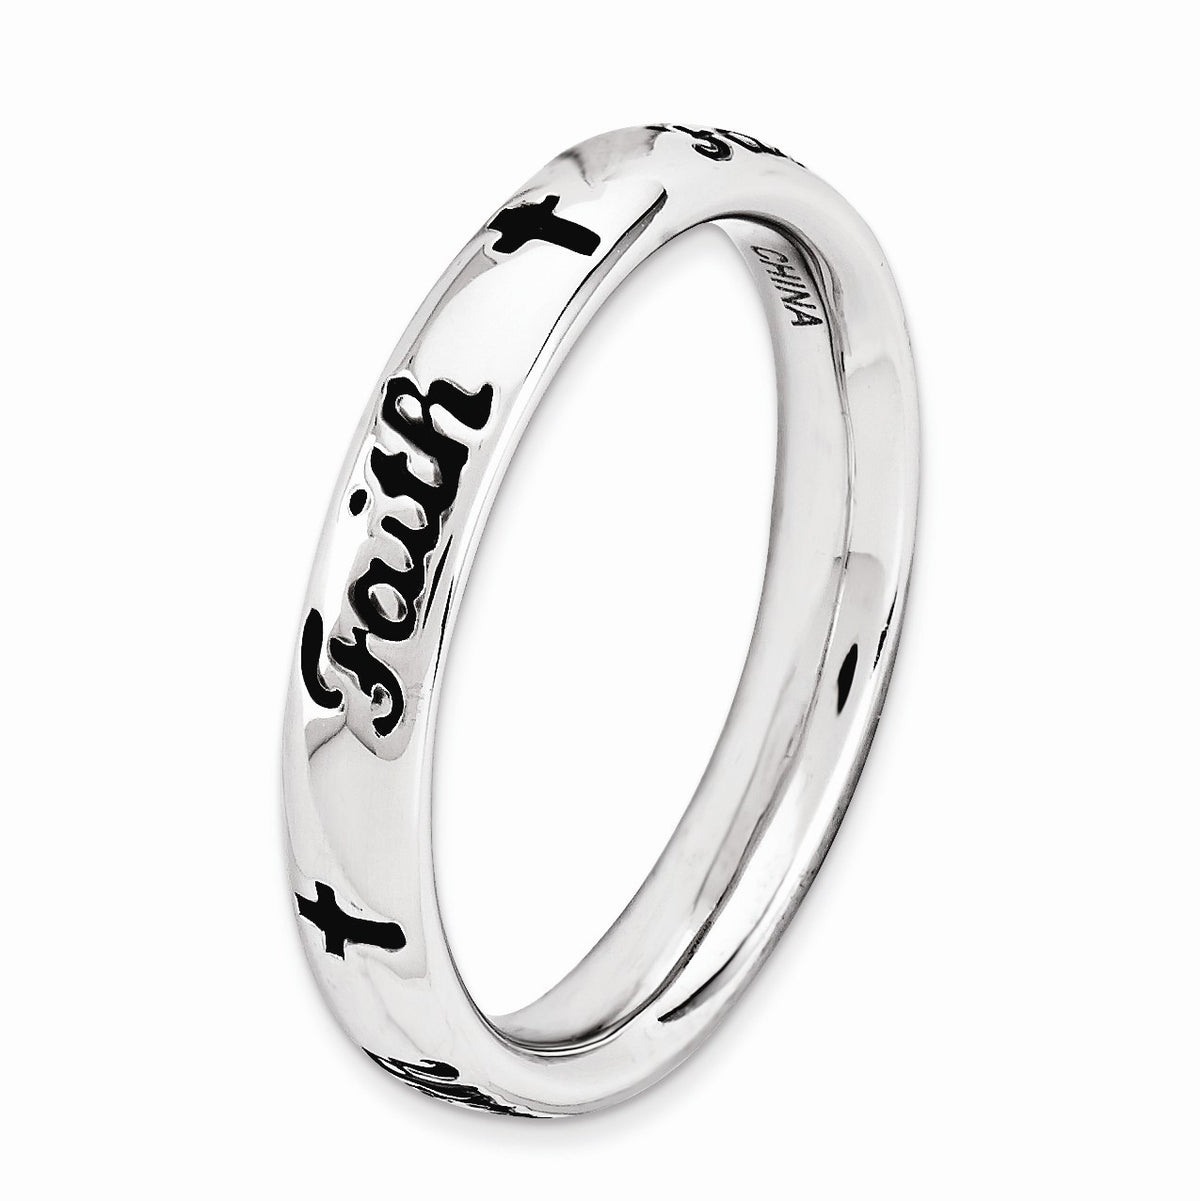 Alternate view of the 3.5mm Sterling Silver Stackable Black Enamel Faith Script Band by The Black Bow Jewelry Co.